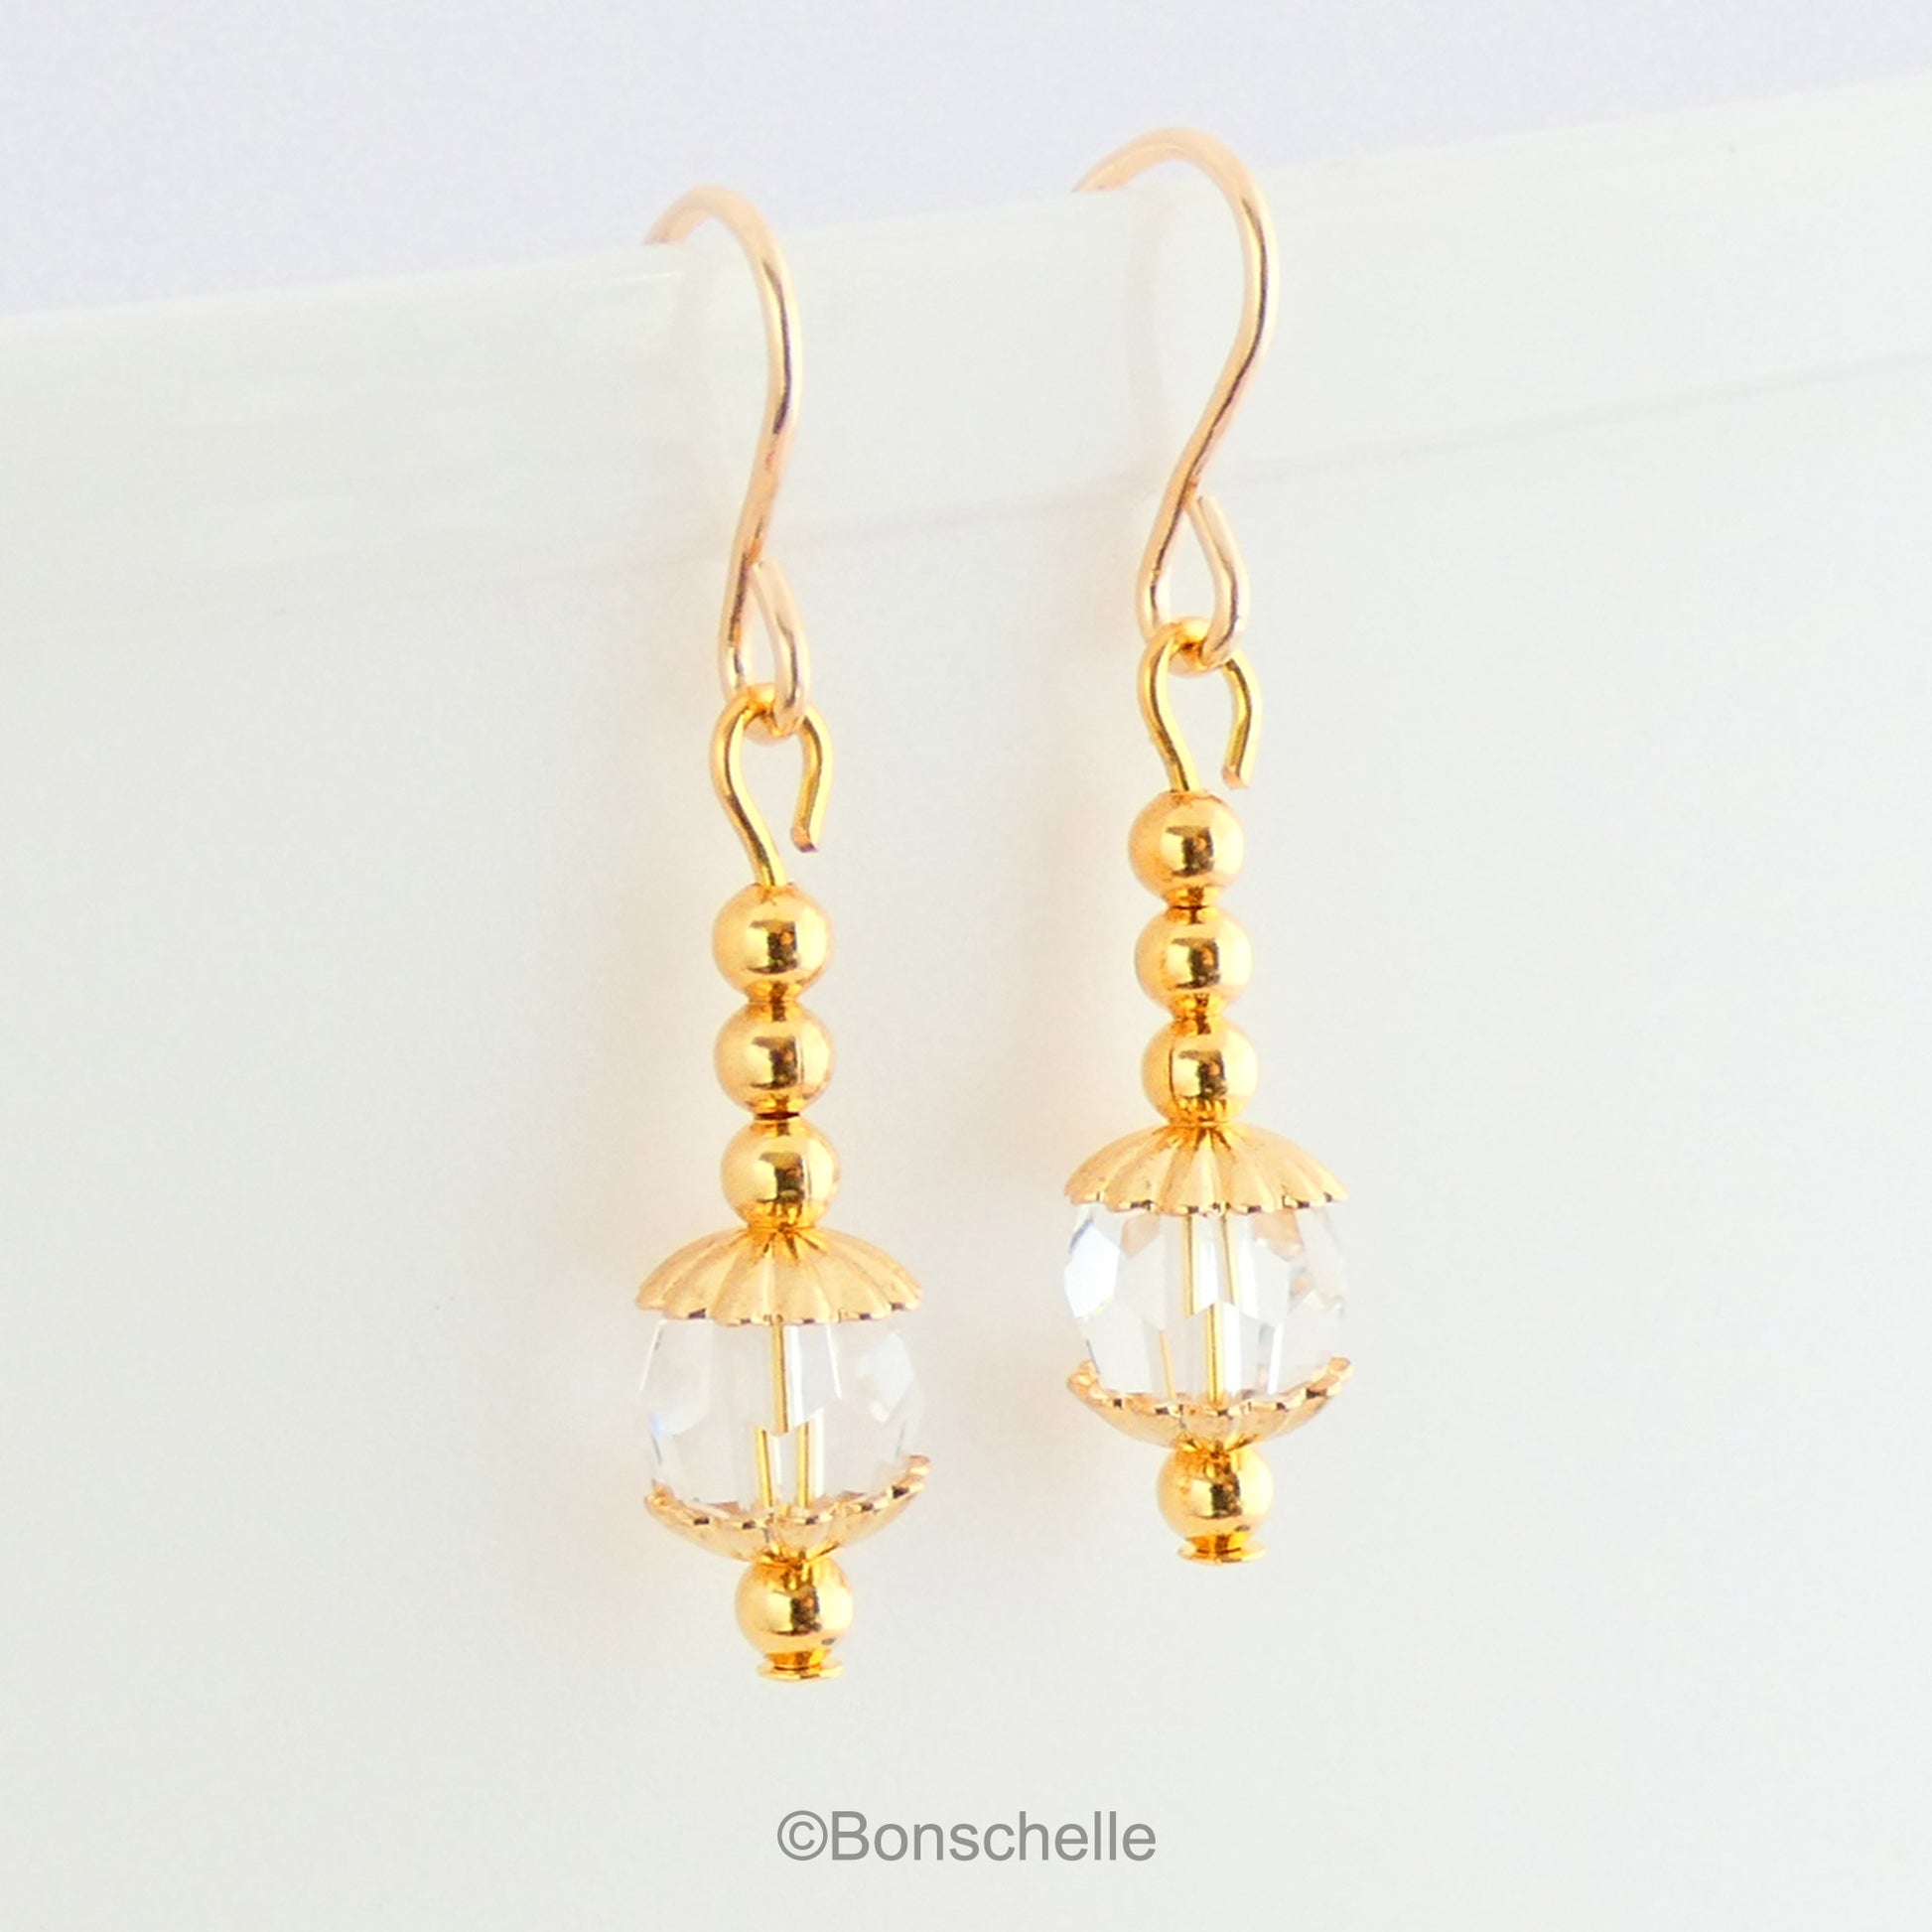 Handmade earrings with clear Swarovksi faceted crystall glass beads, gold tone small beads adn 14K gold filled earwires